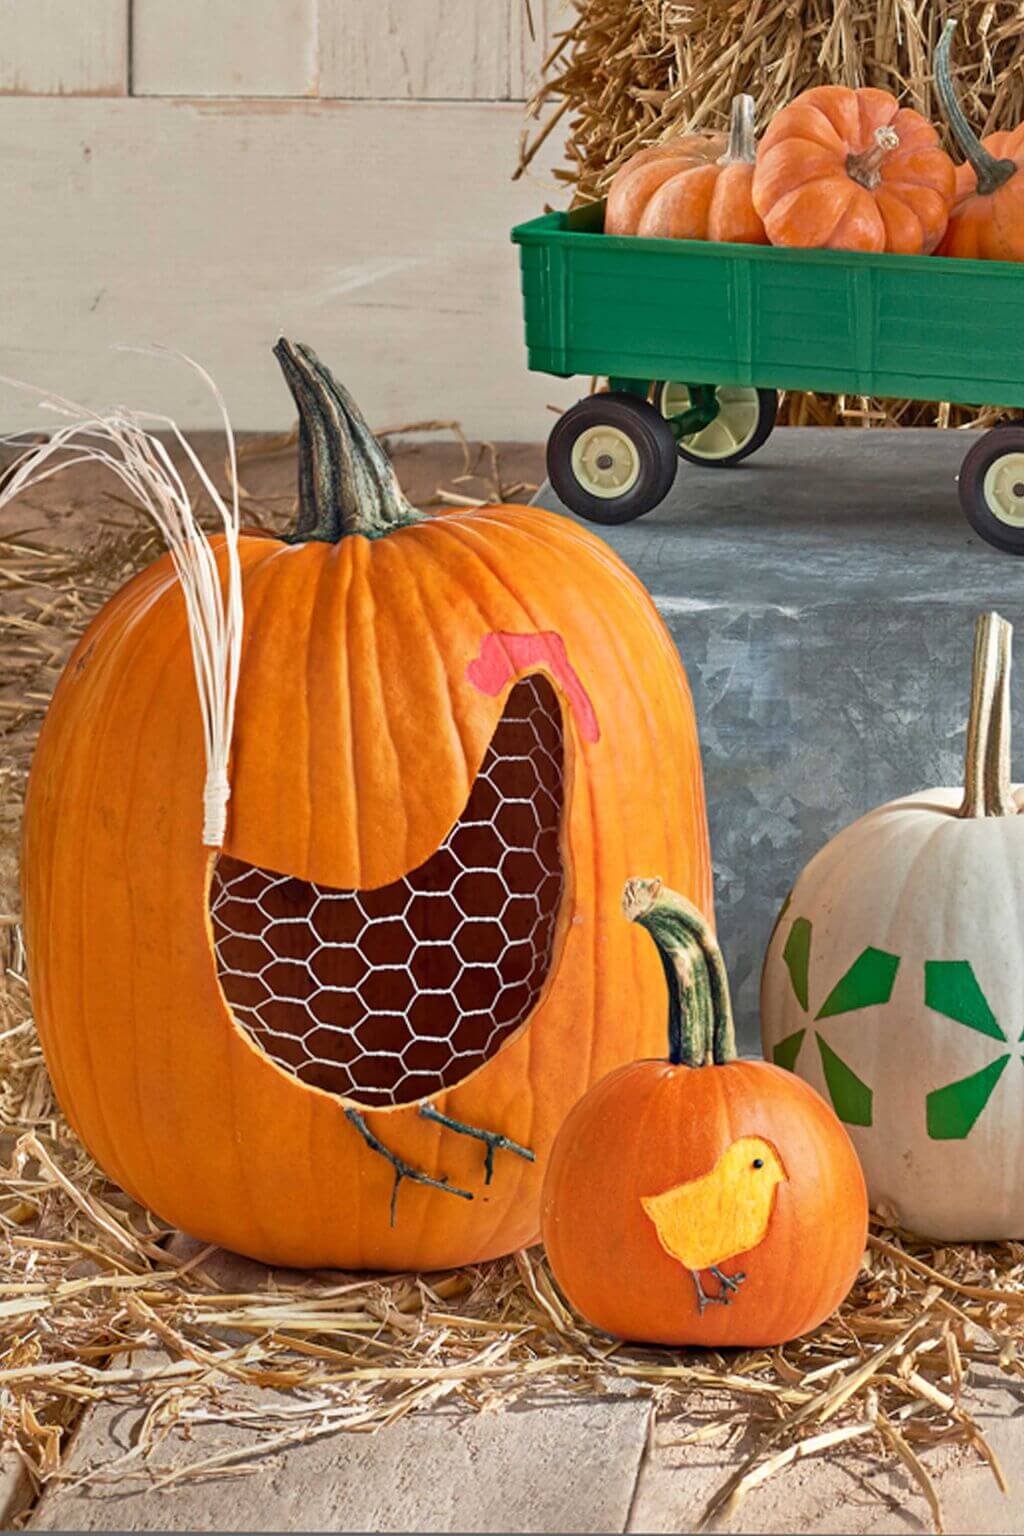 Cool Pumpkin Carvings with Chicken Mesh